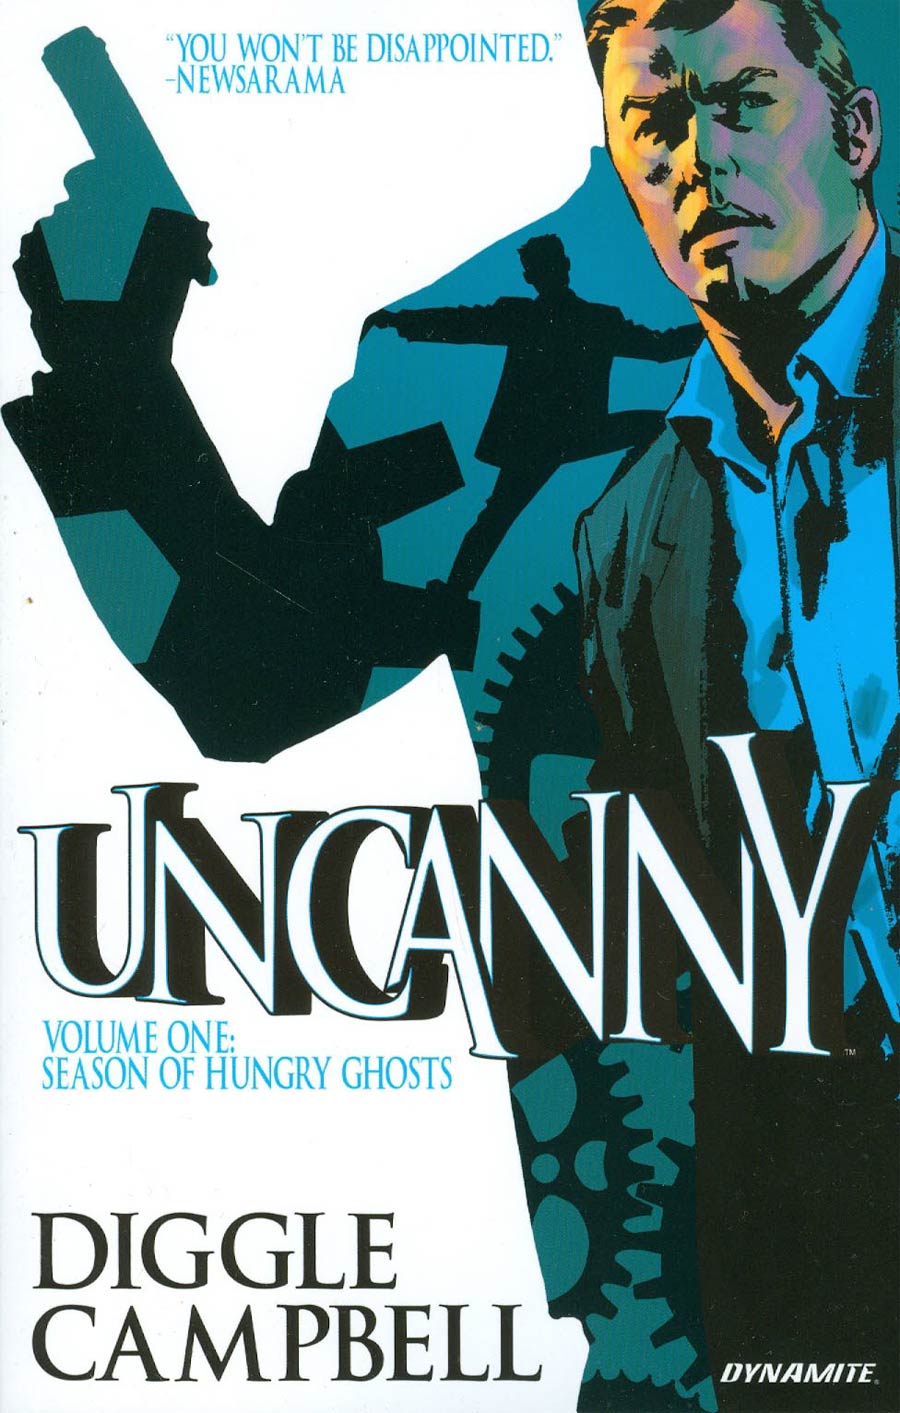 Uncanny Vol 1 Season Of Hungry Ghosts TP